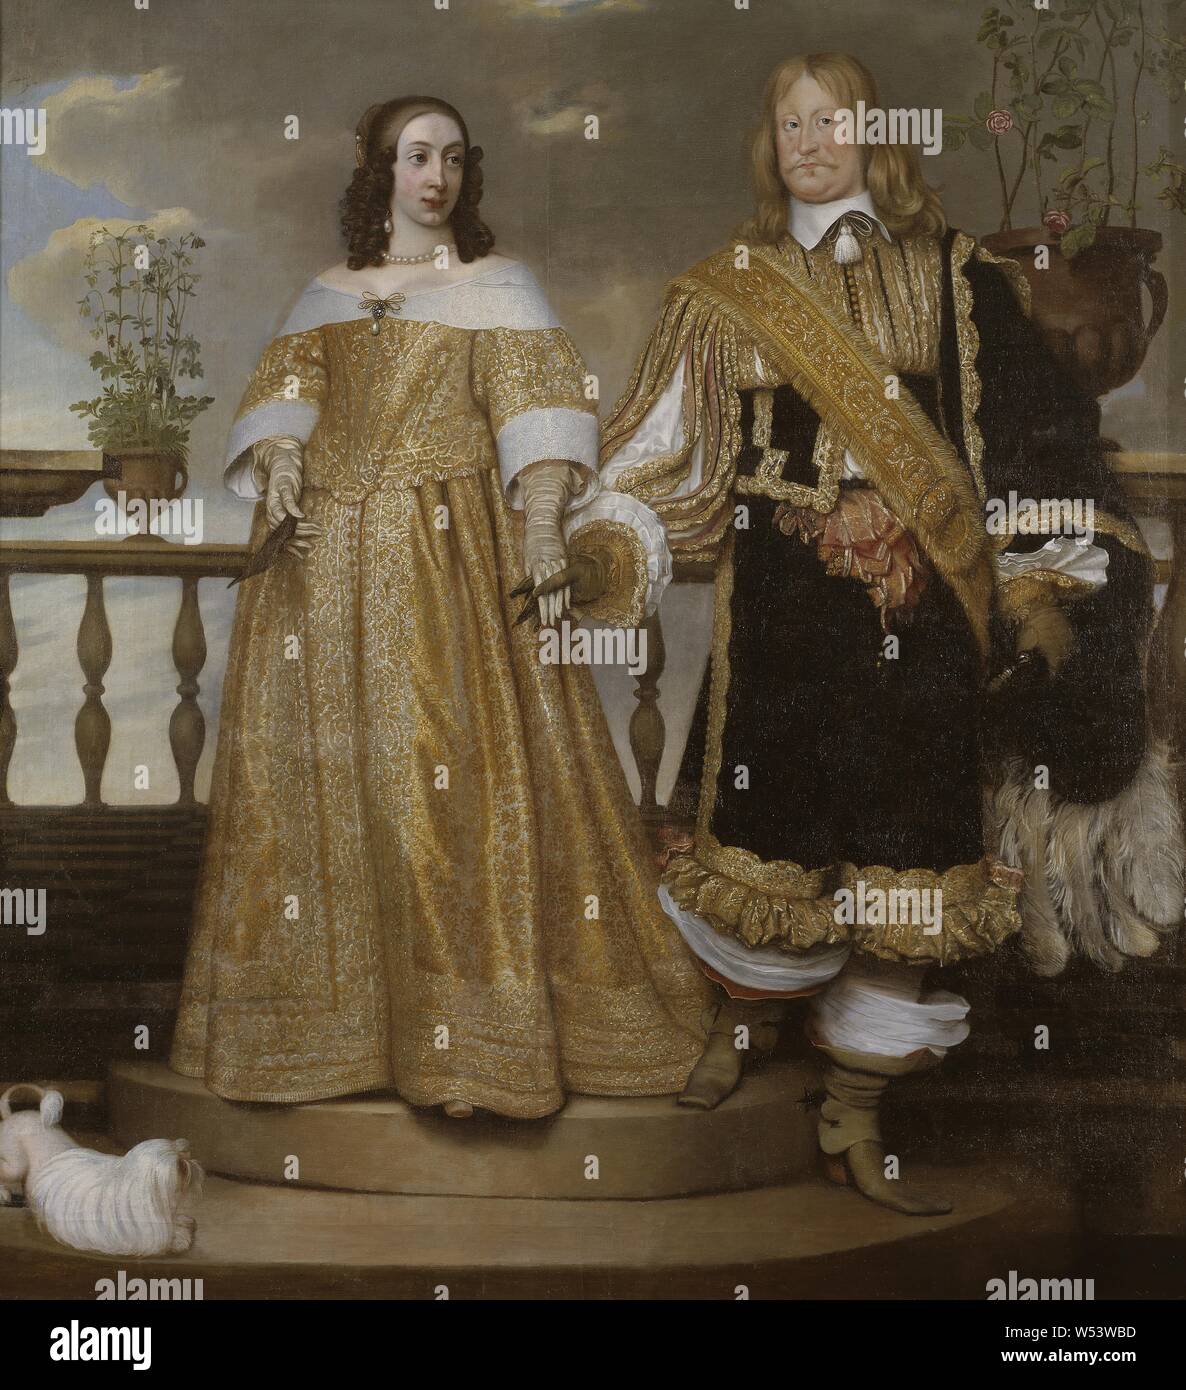 Henrik Münnichhofen, Maria Eufrosyne and Magnus Gabriel De la Gardie, Magnus Gabriel De la Gardie, 1622-1686, Maria Eufrosyne of Palatinate-Zweibrücken, 1625-1687, painting, Countess Palatine Maria Eufrosyne of Zweibrücken, oil on canvas, Height, 219 cm (86.2 inches), Width, 201 cm (79.1 inches) Stock Photo